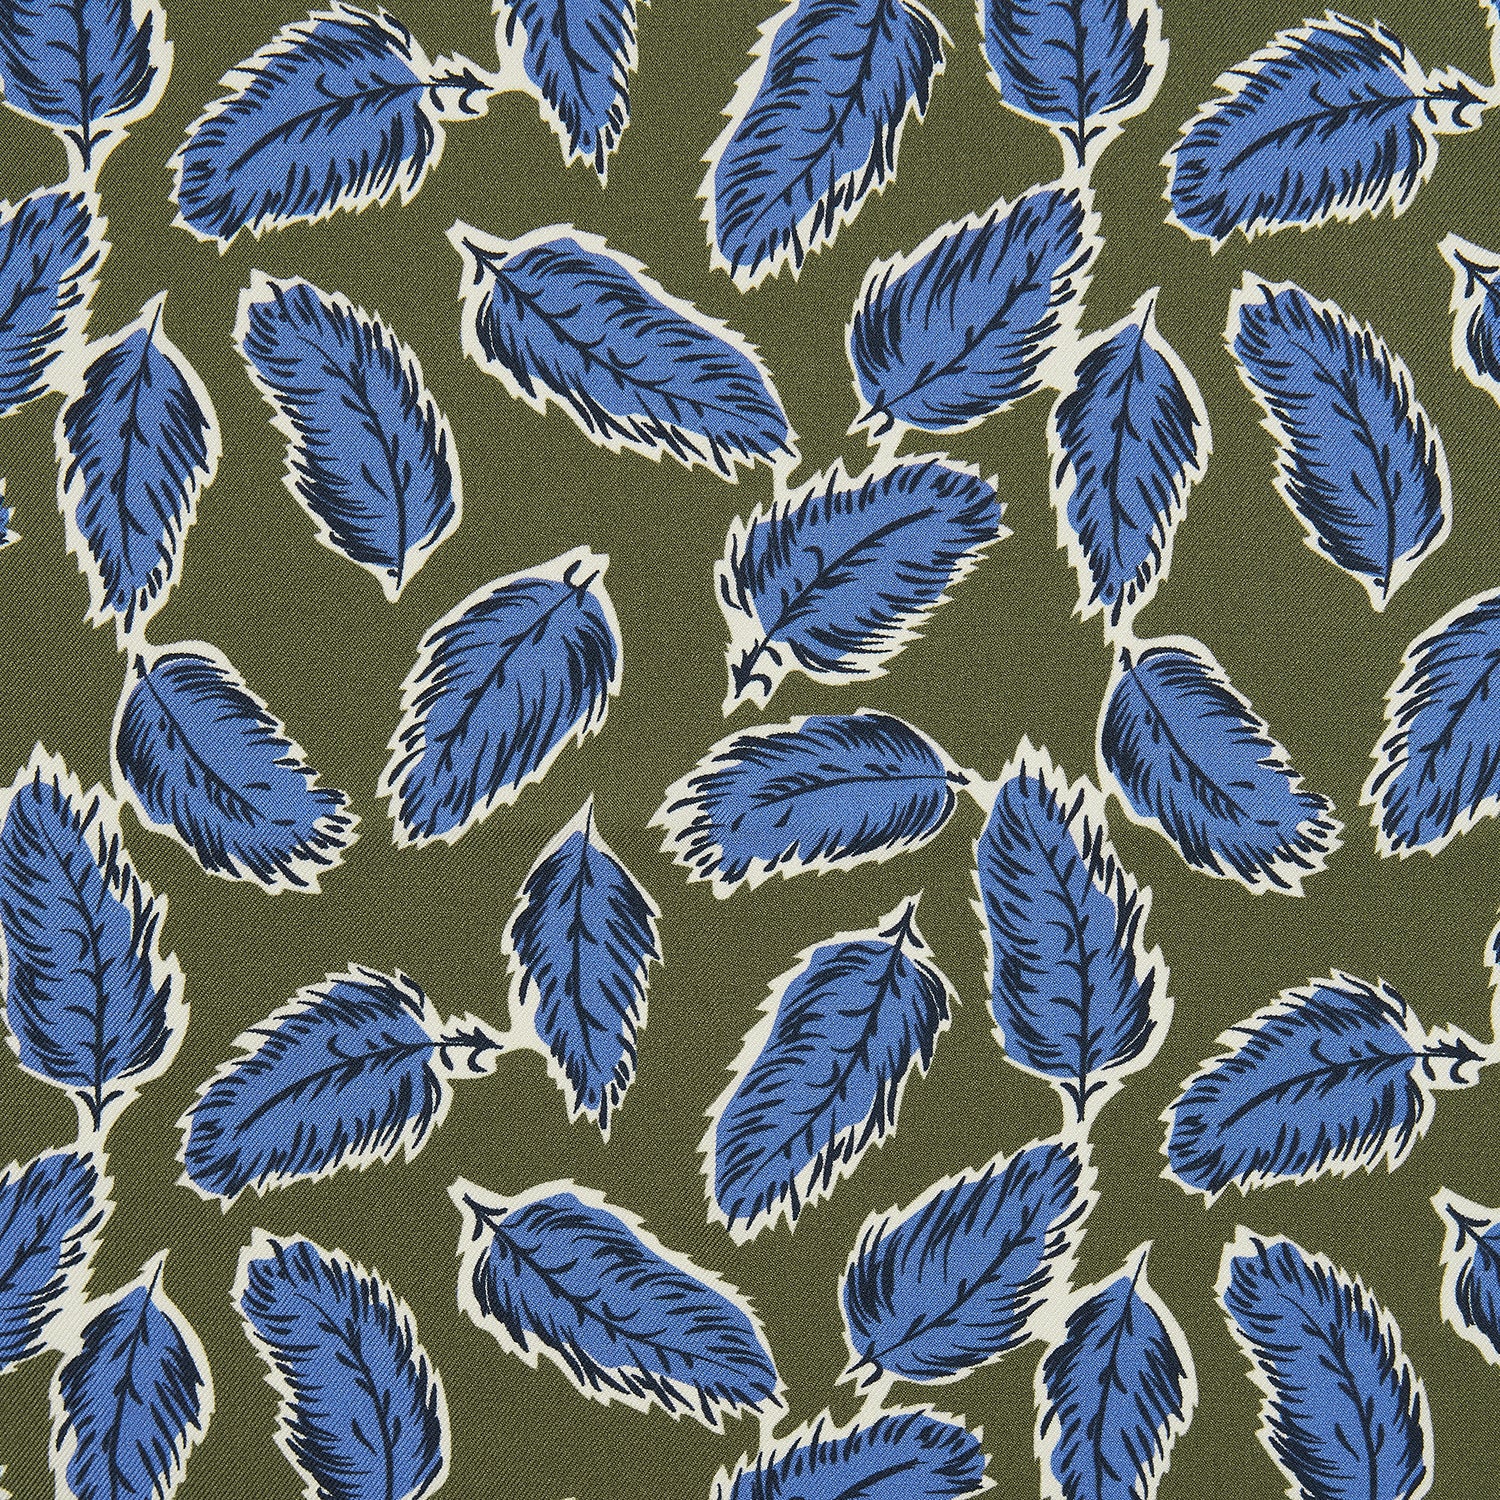 Olive Abstract Feather Print Silk Pocket Square